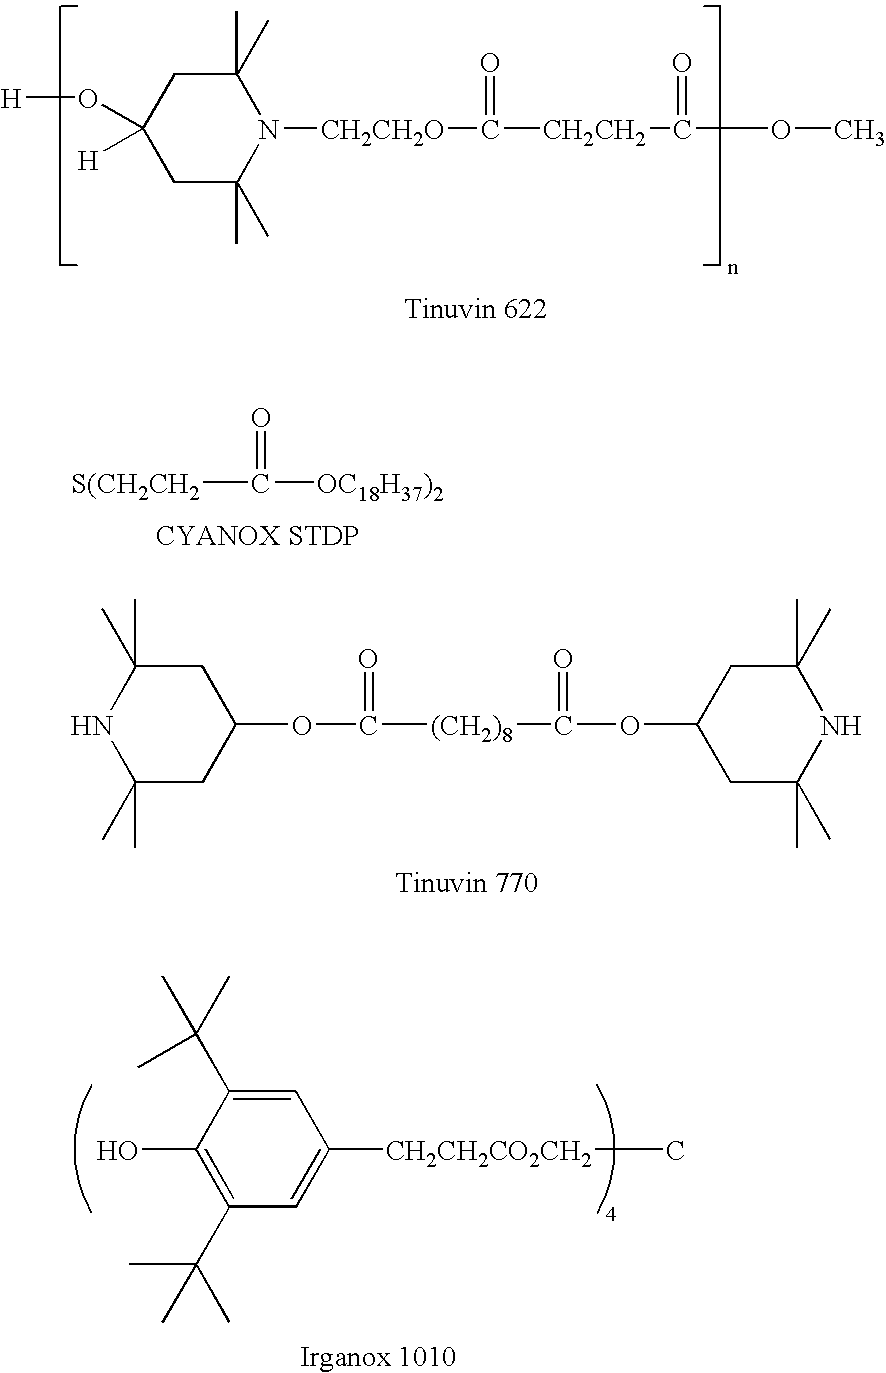 Self limiting catalyst composition and propylene polymerization process